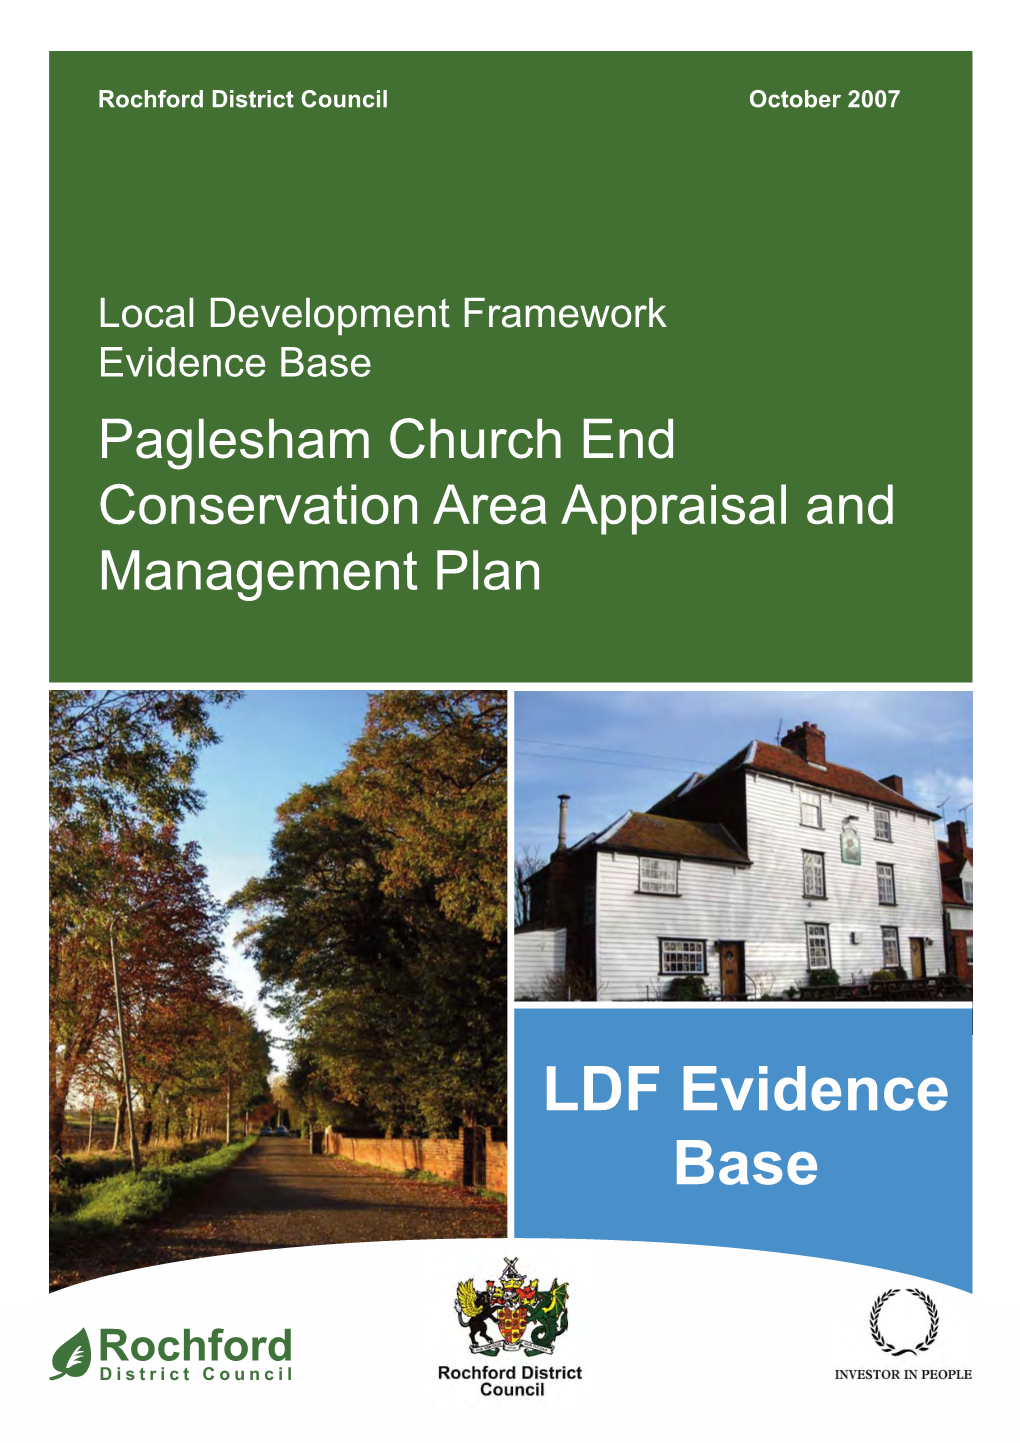 Paglesham Church End Conservation Area Appraisal and Management Plan